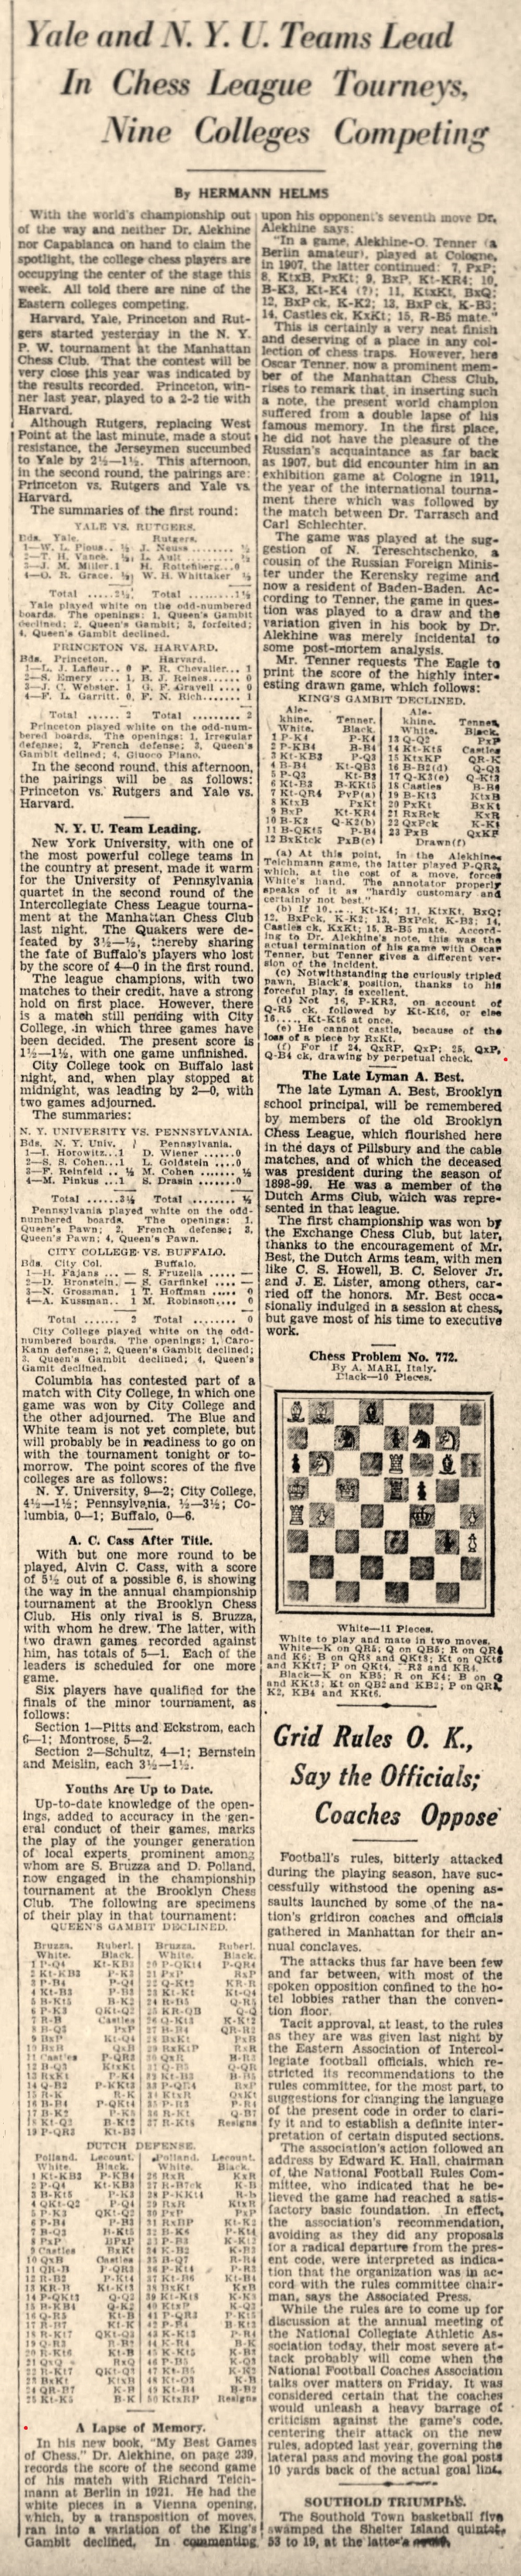 A Century of Chess: Alexander Alekhine (from 1910-19) 